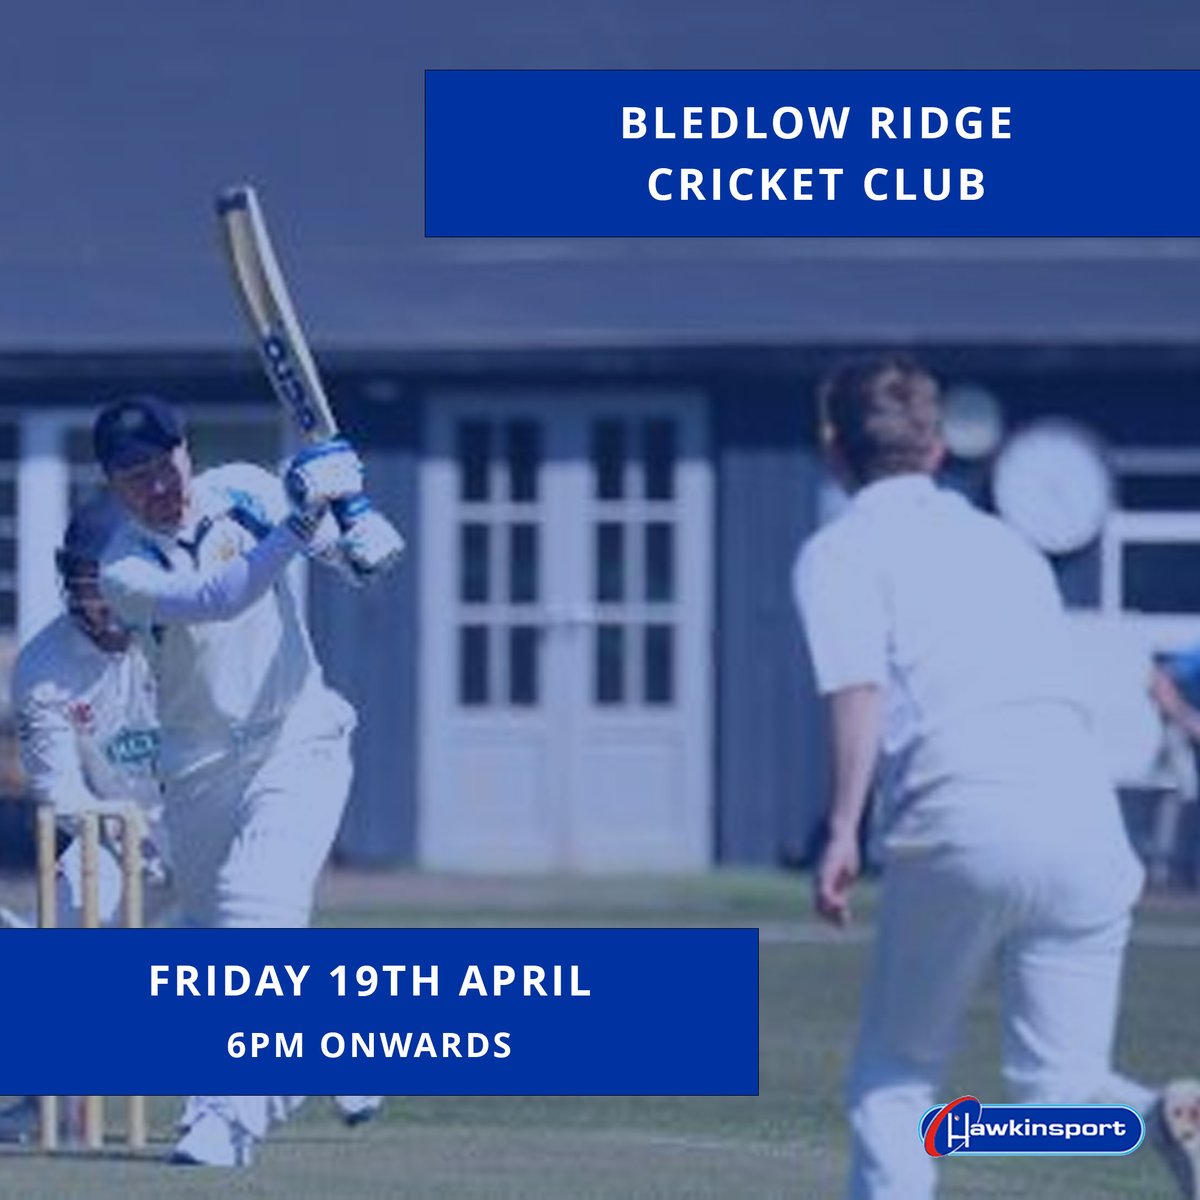 We will be at @bledlowridgecc this evening from 6pm onwards with all things cricket to sell! Head on down and say hello 😀👍

#bledlowridgecricketclub #cricket #cricketclub #clubvisit #cricketlover #hawkinsport